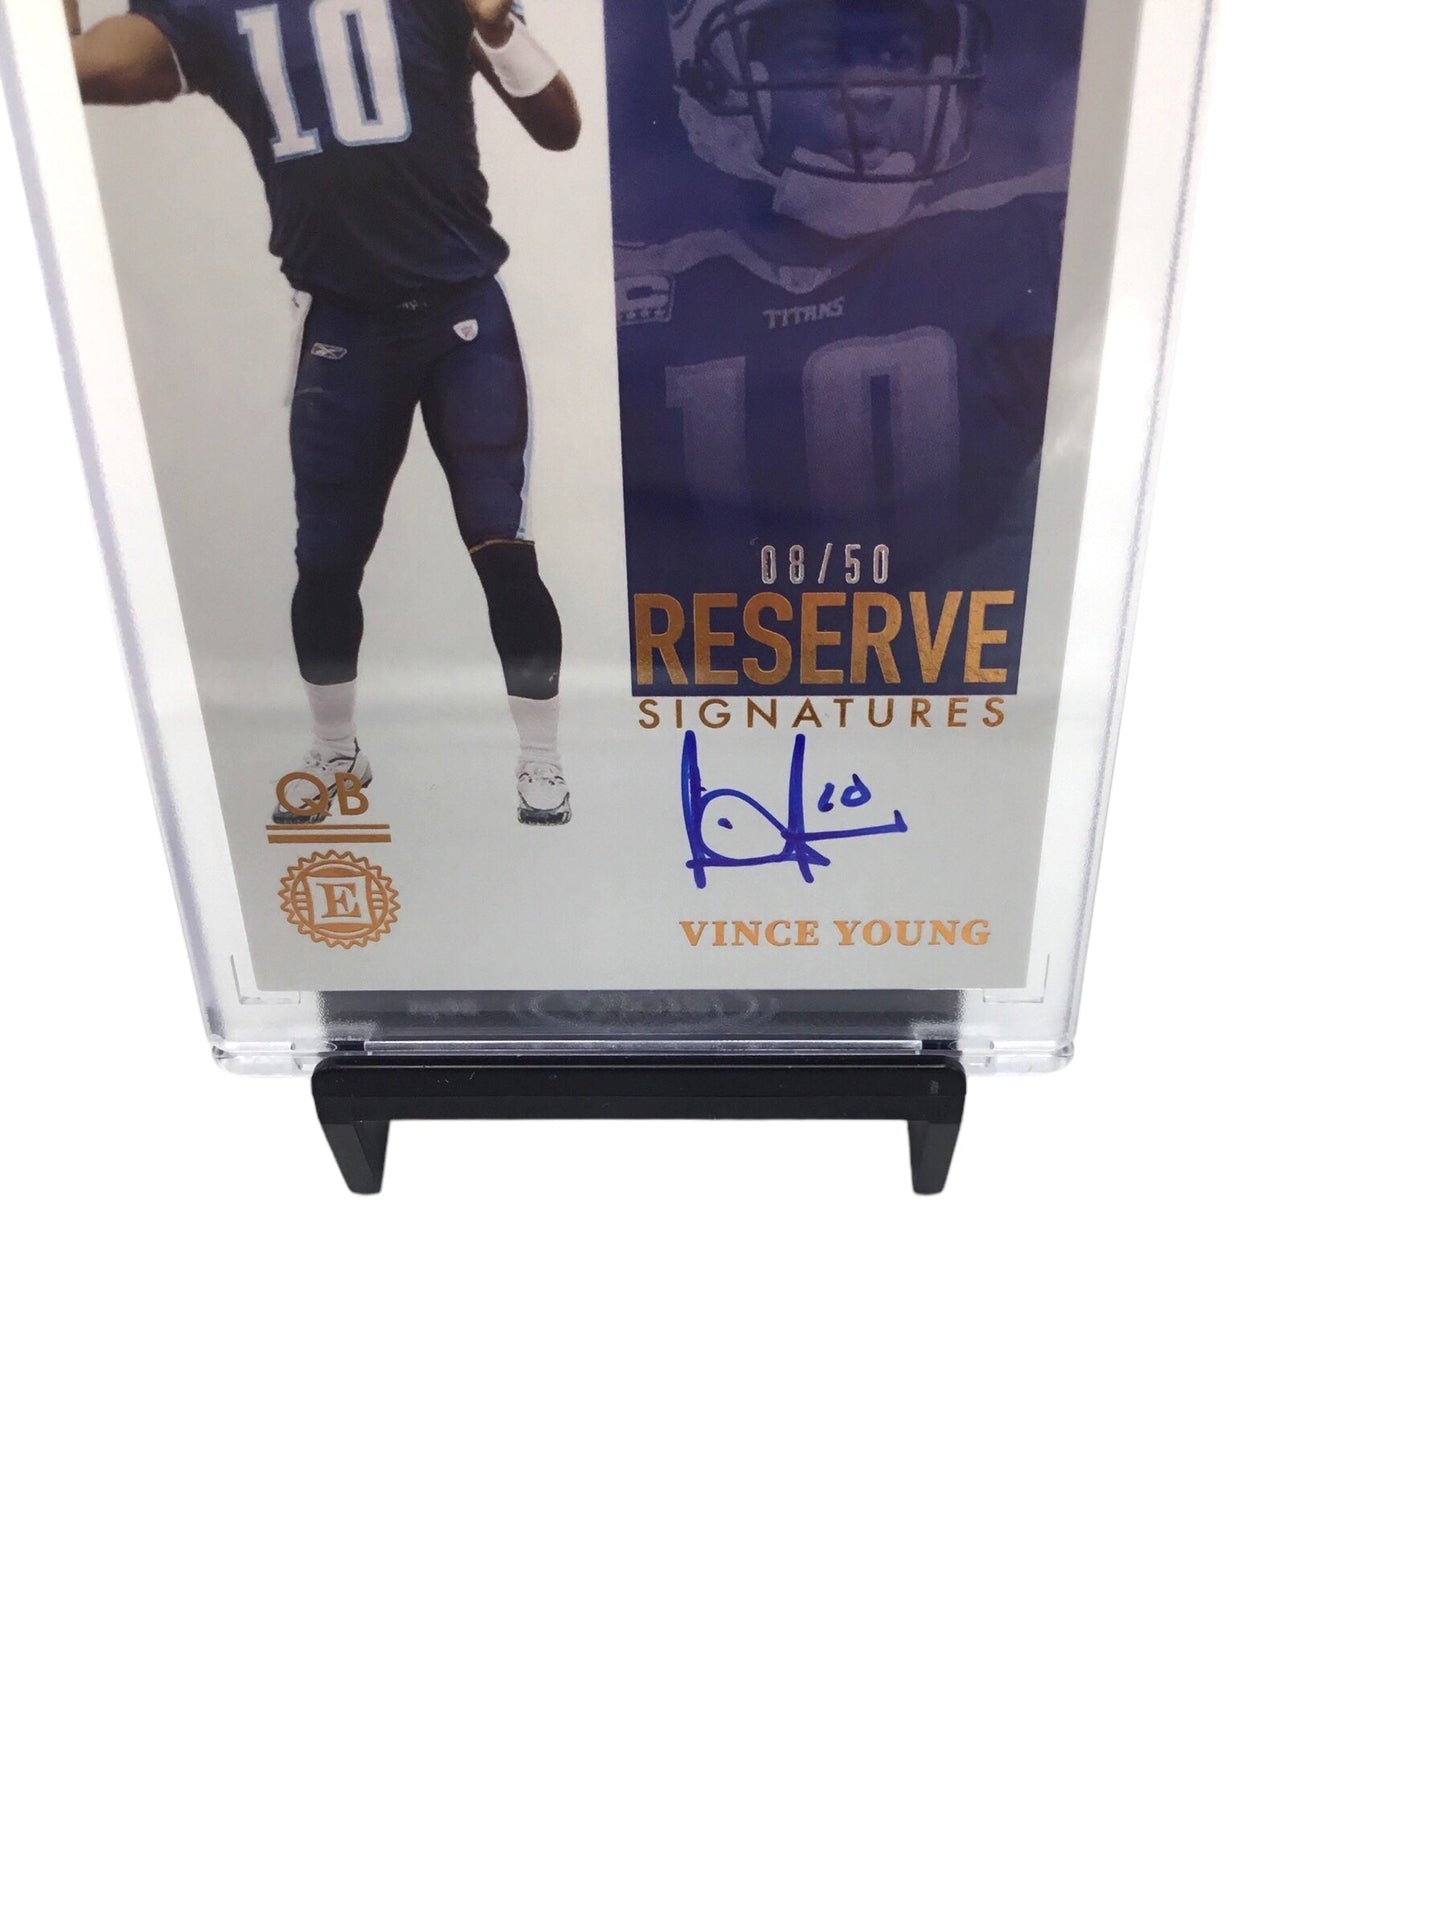 2021 Panini Encased Reserve Signatures #RSVY Vince Young /50